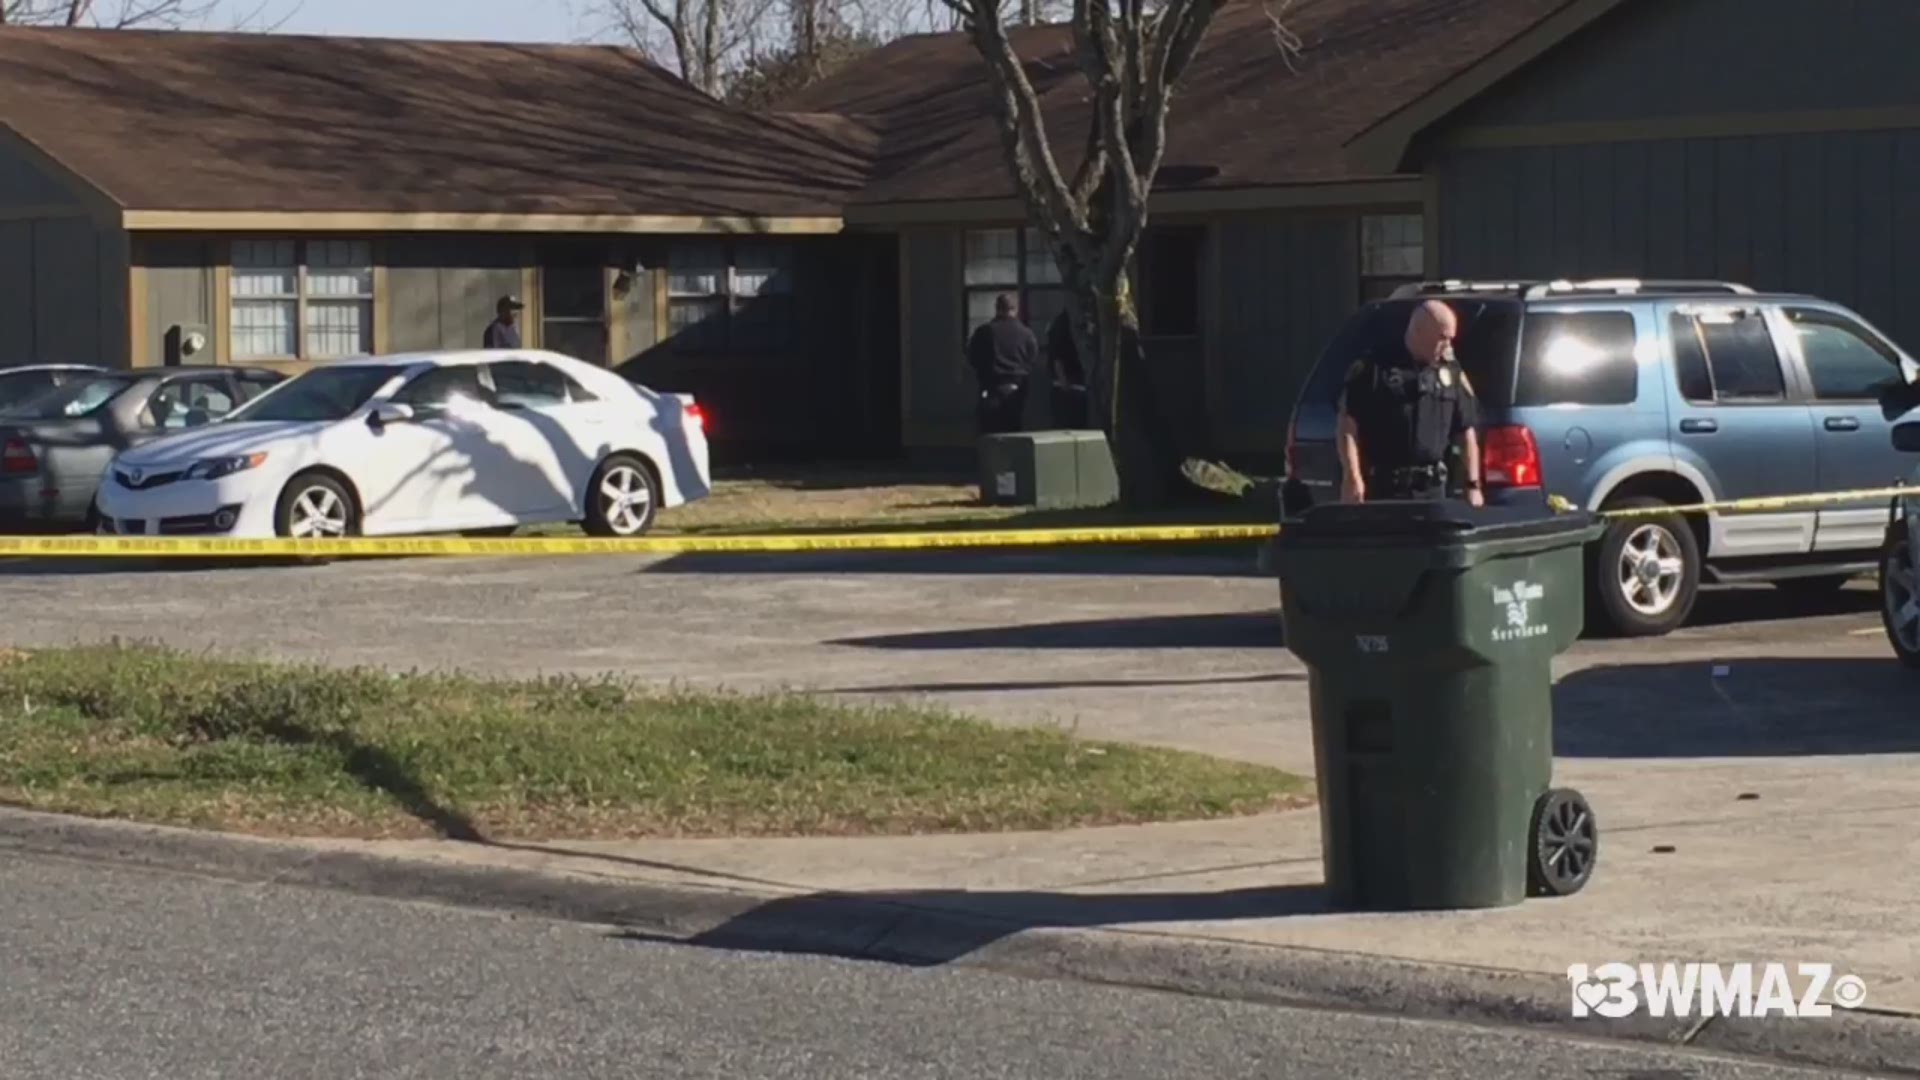 The shooting happened around 2:30 p.m. on the 600-block of Gawin Drive in Warner Robins.